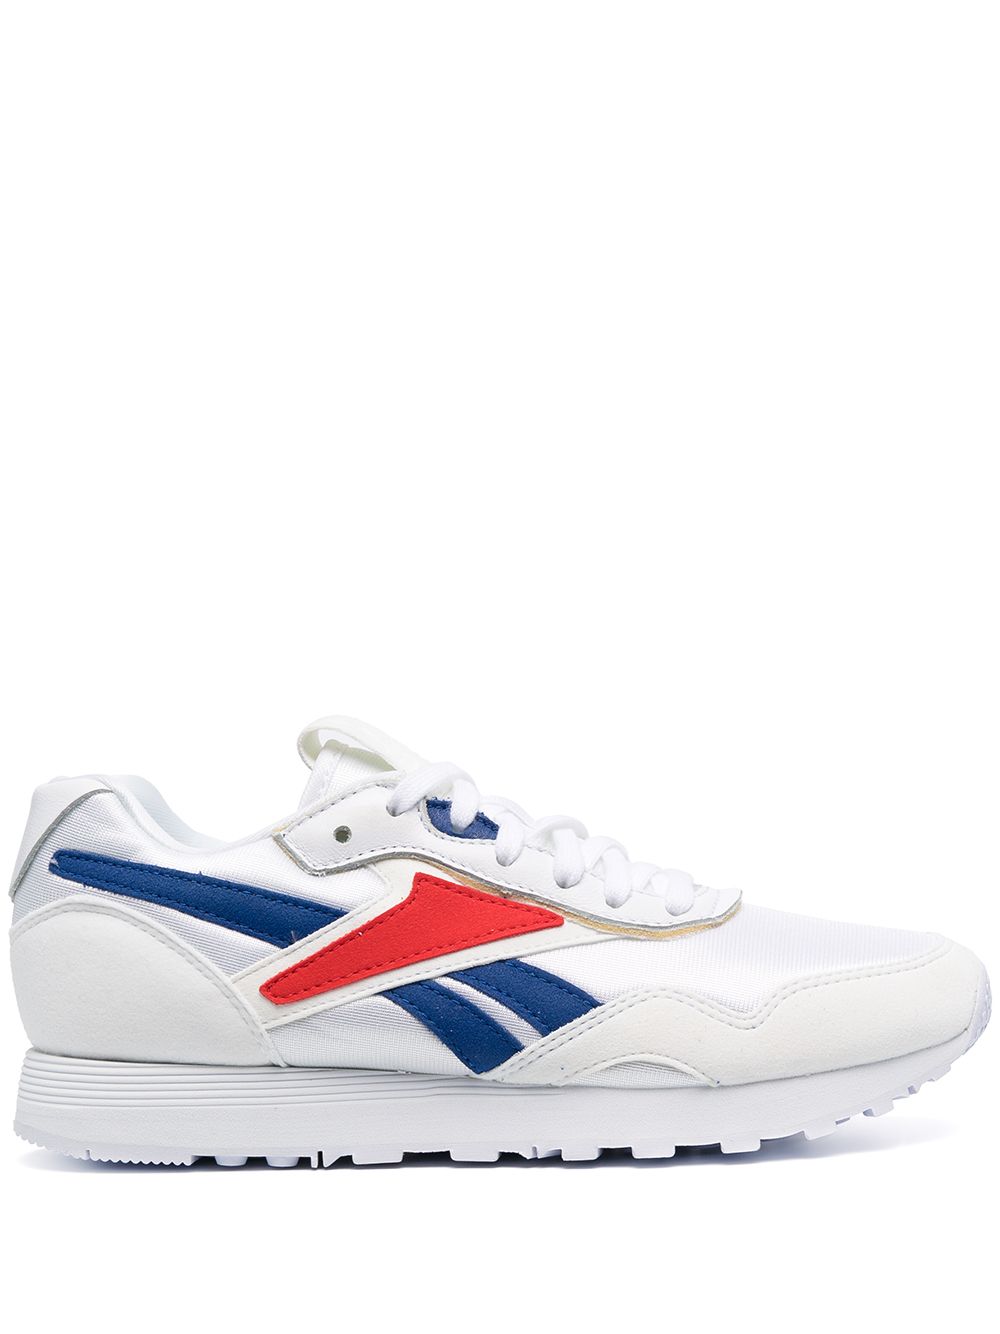 Rapide Sneakers дамски обувки Reebok By Victoria Beckham 840660636_4